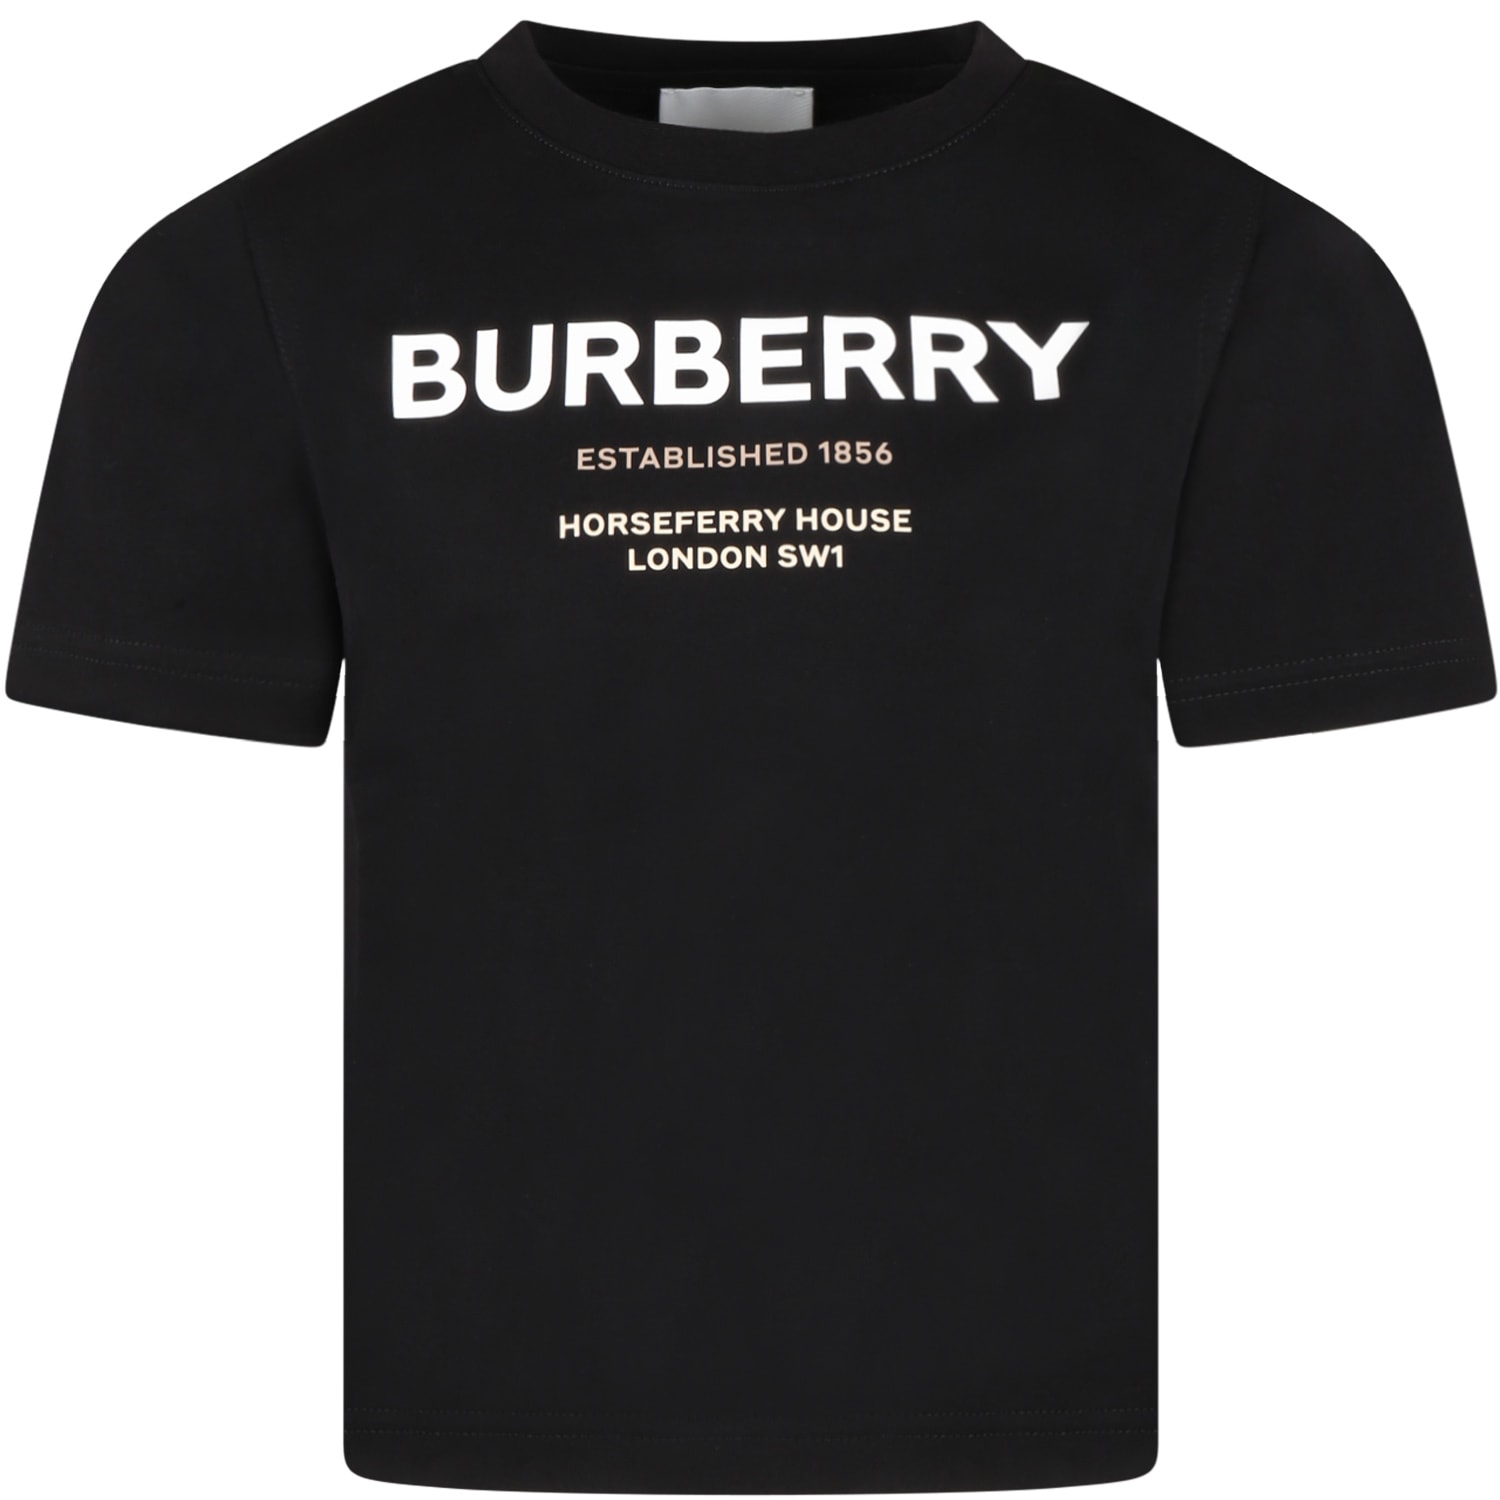 BURBERRY BLACK T-SHIRT FOR KIDS WITH WHITE LOGO